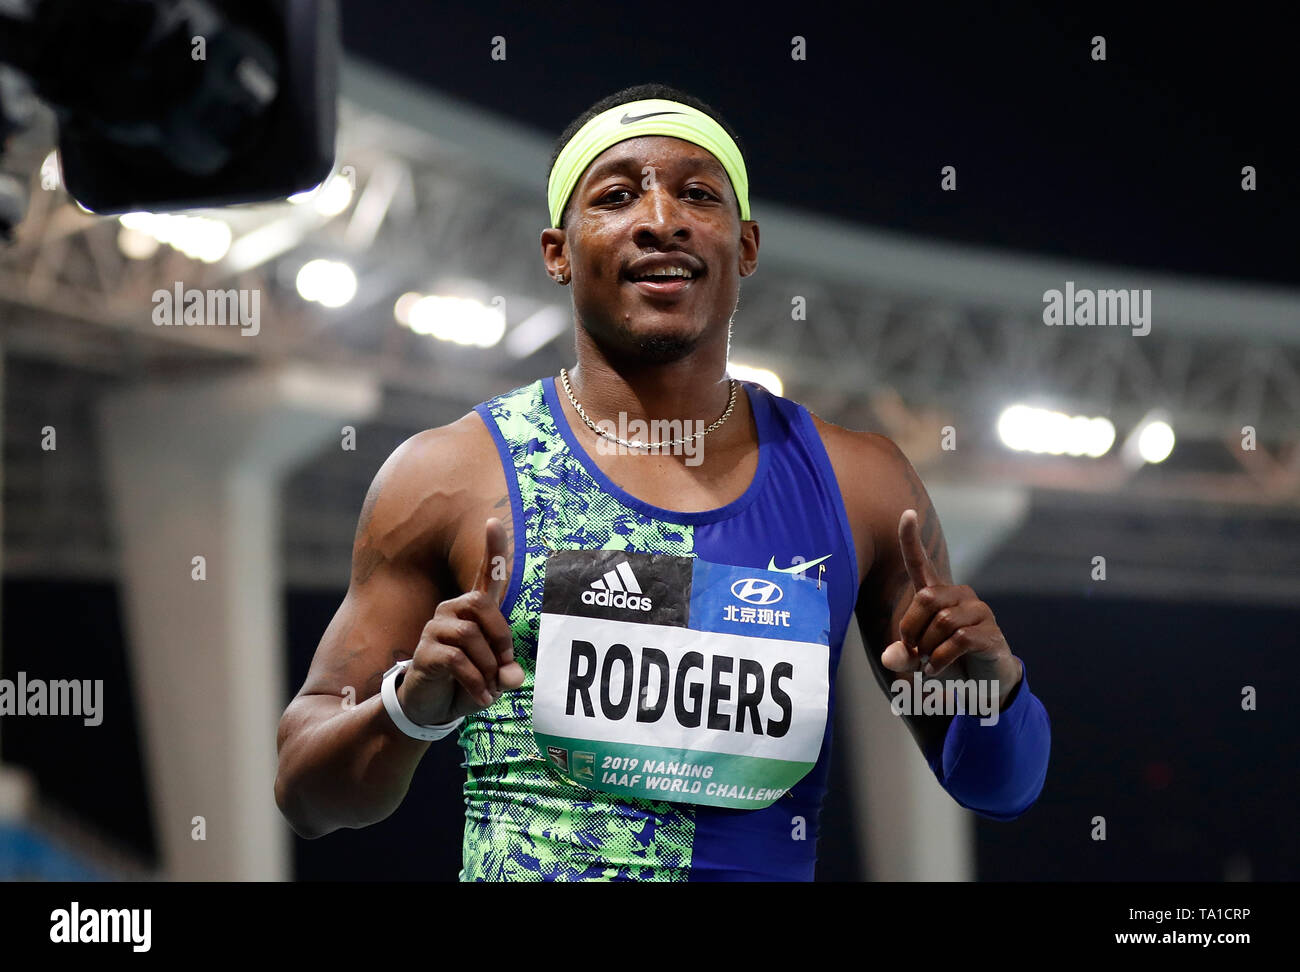 Mike rodgers High Resolution Stock Photography and Images - Alamy